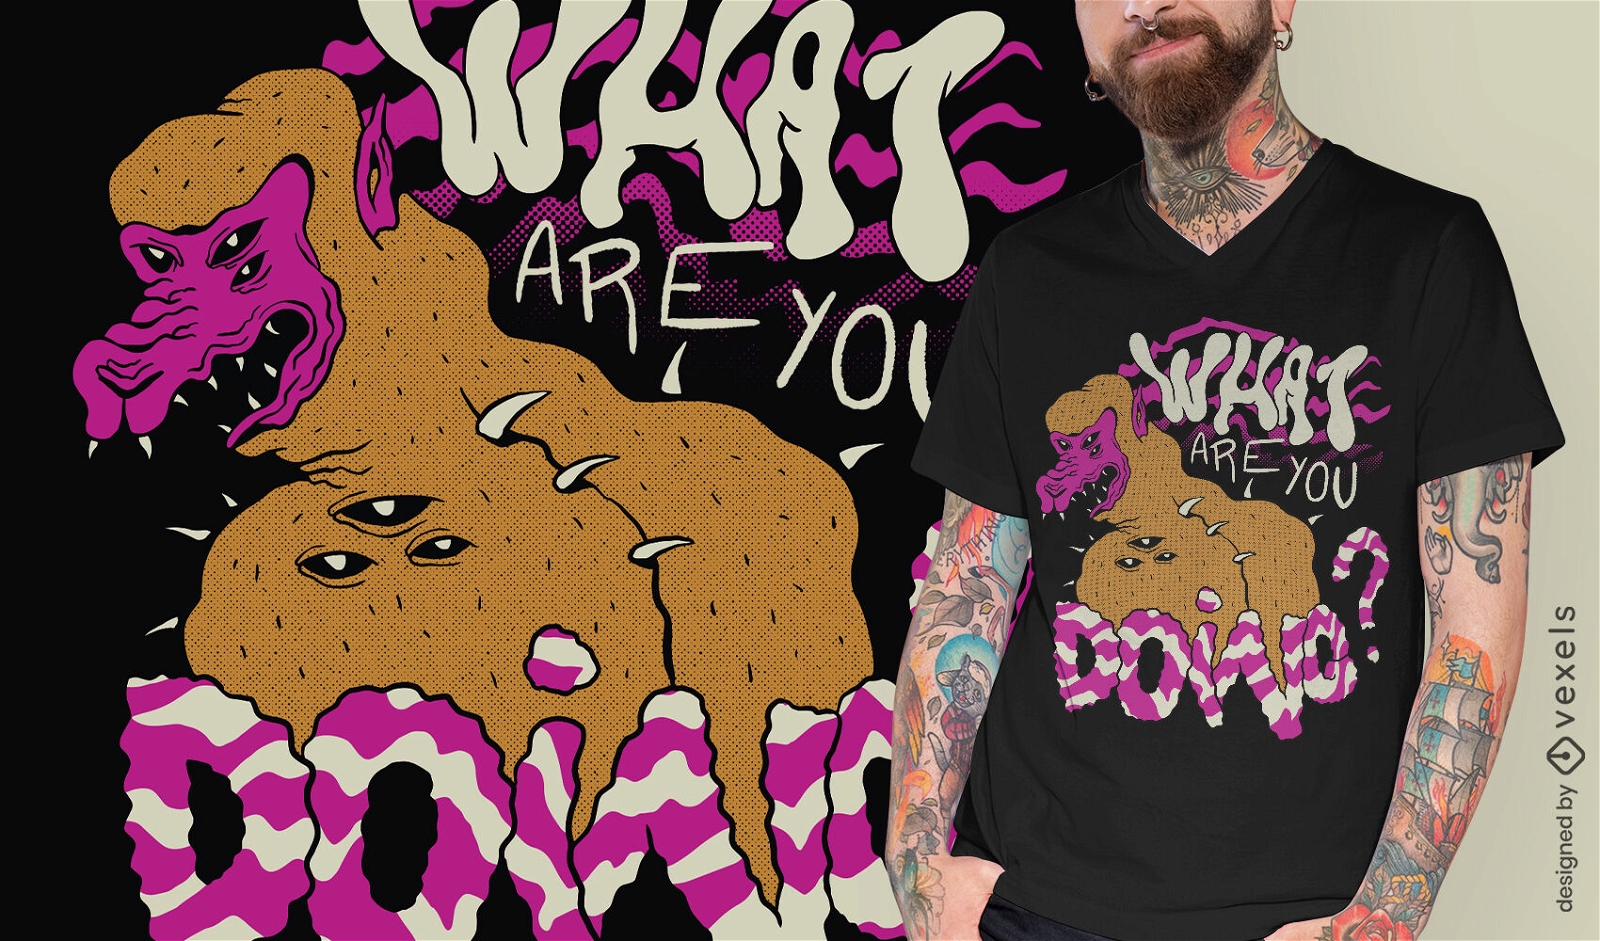 Creepy creature and quote t-shirt design